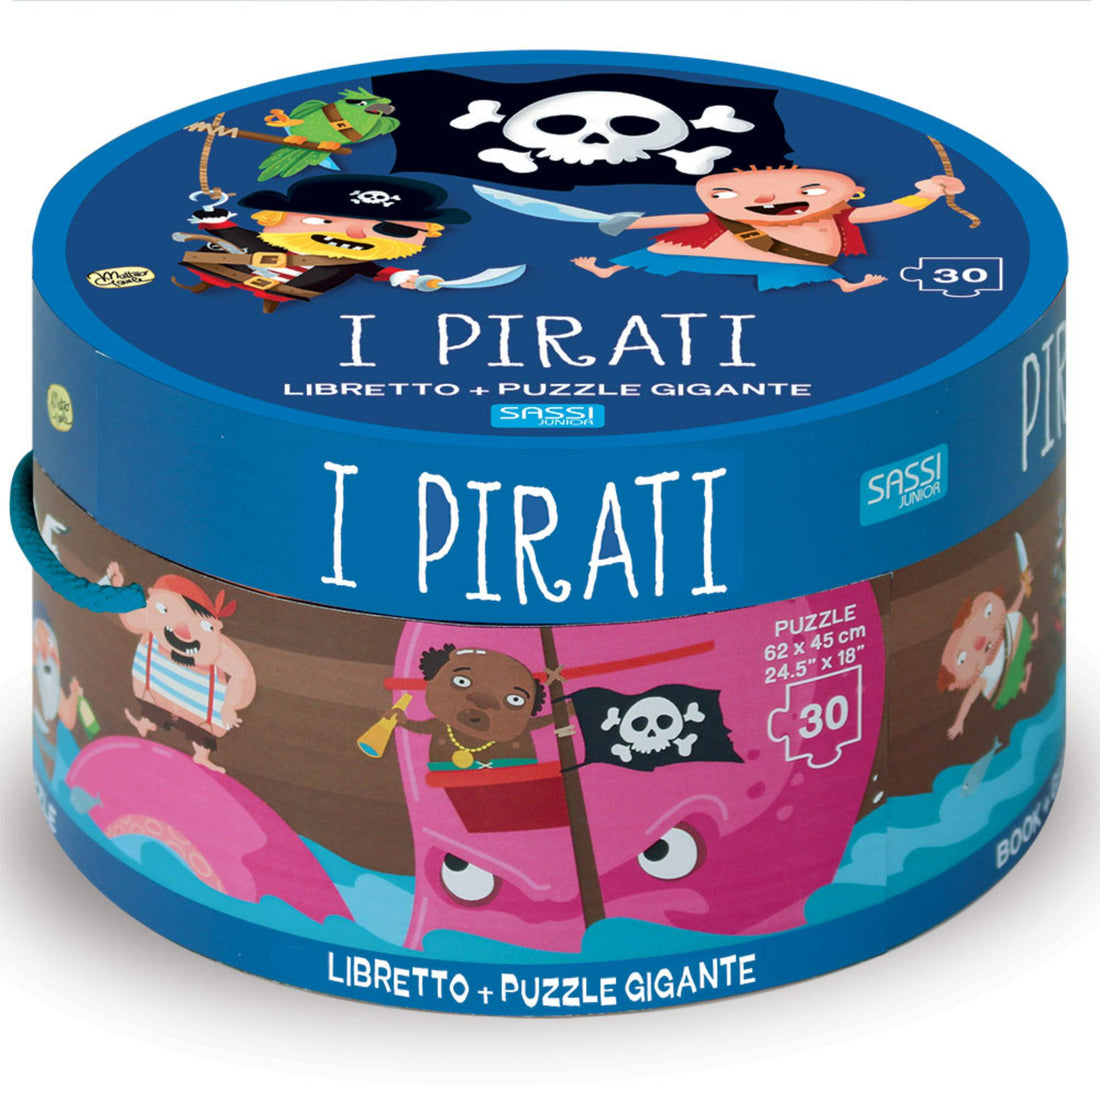 30 Piece Puzzle The Pirates New Edition (Round Box And Book Puzzle)